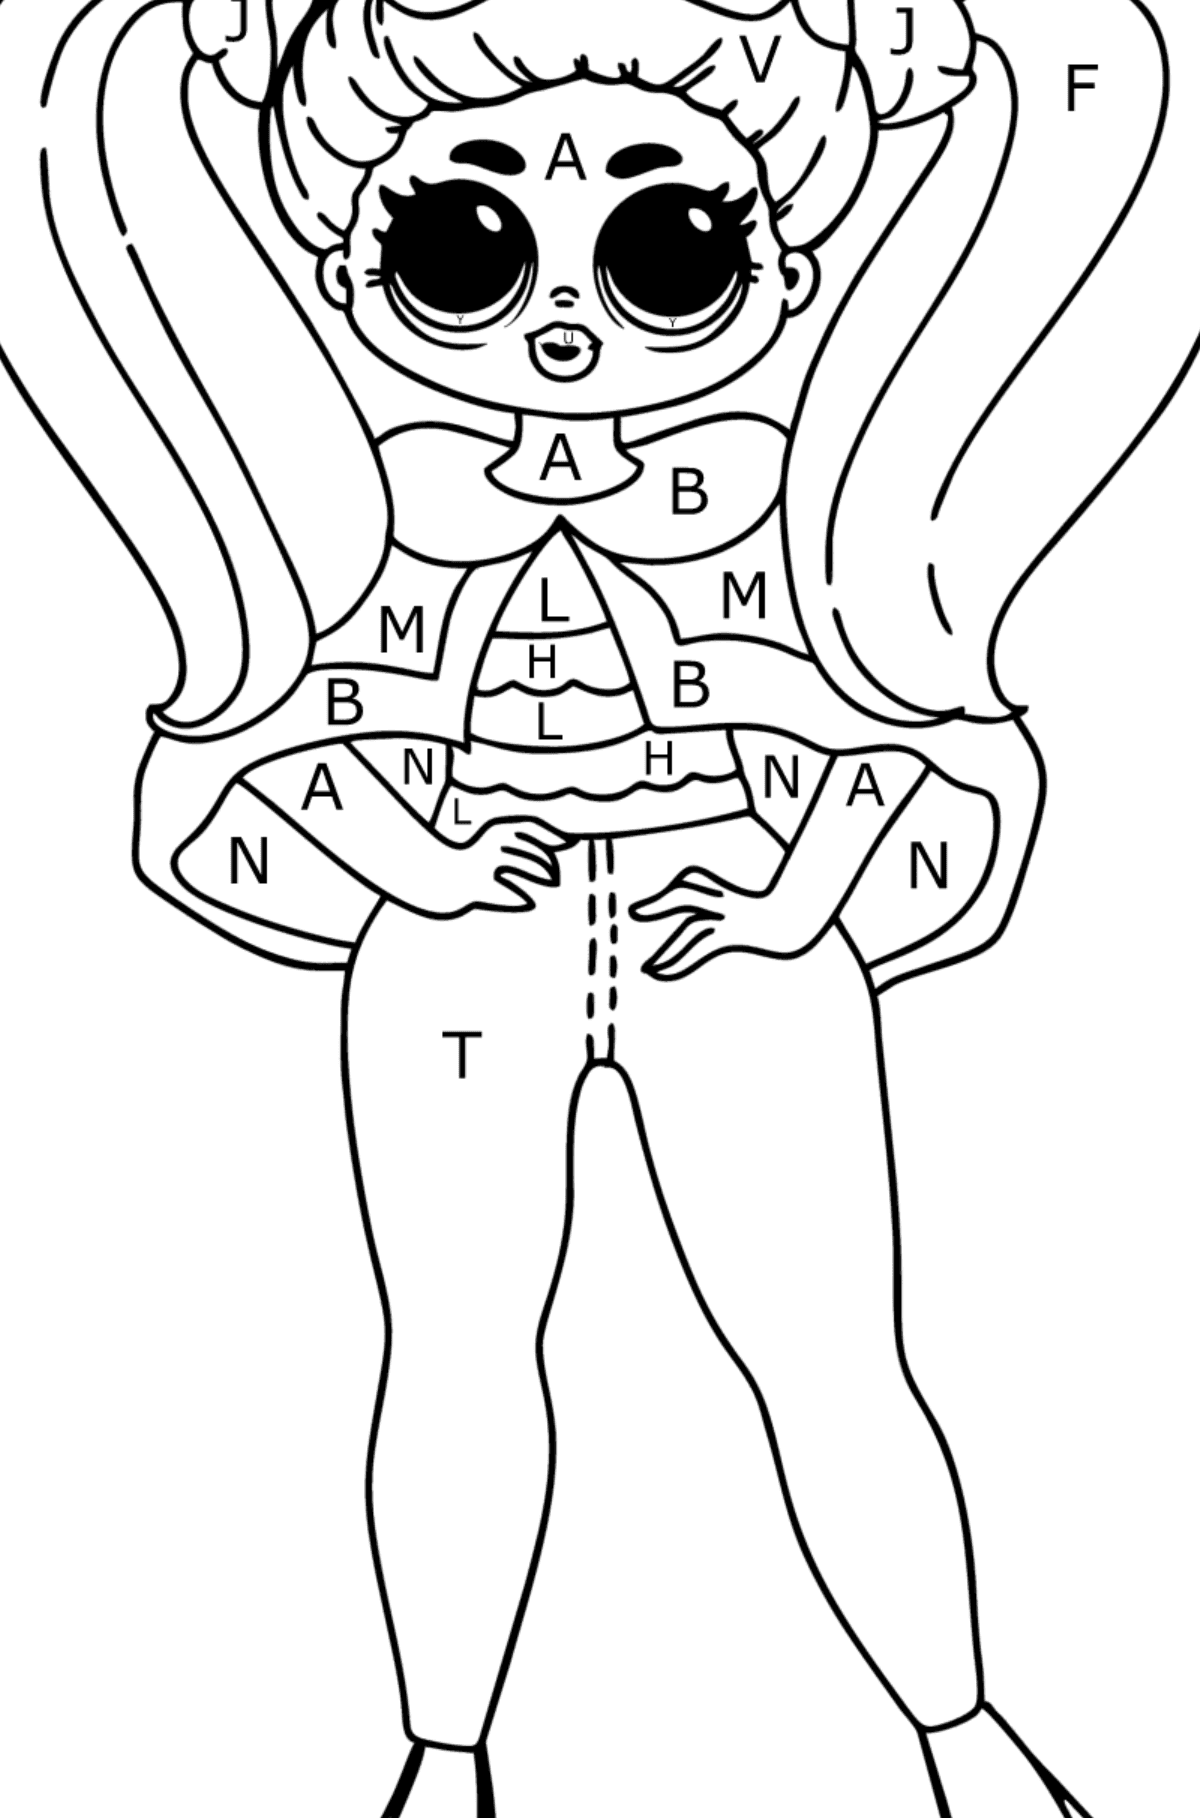 Coloring page LOL Surprise OMG - Coloring by Letters for Kids